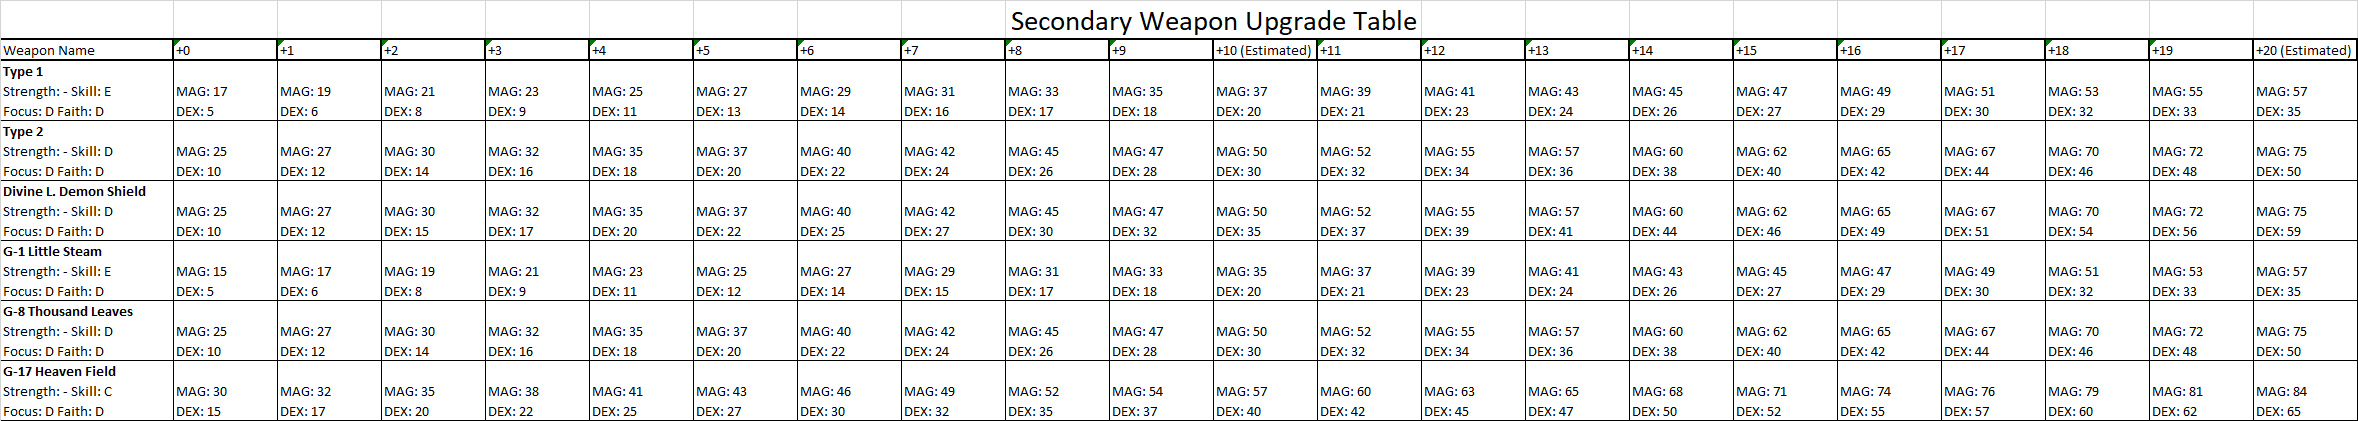 LOST EPIC Weapon Stats - Recipes & Skills Guide - Secondary Weapons - A90AA18